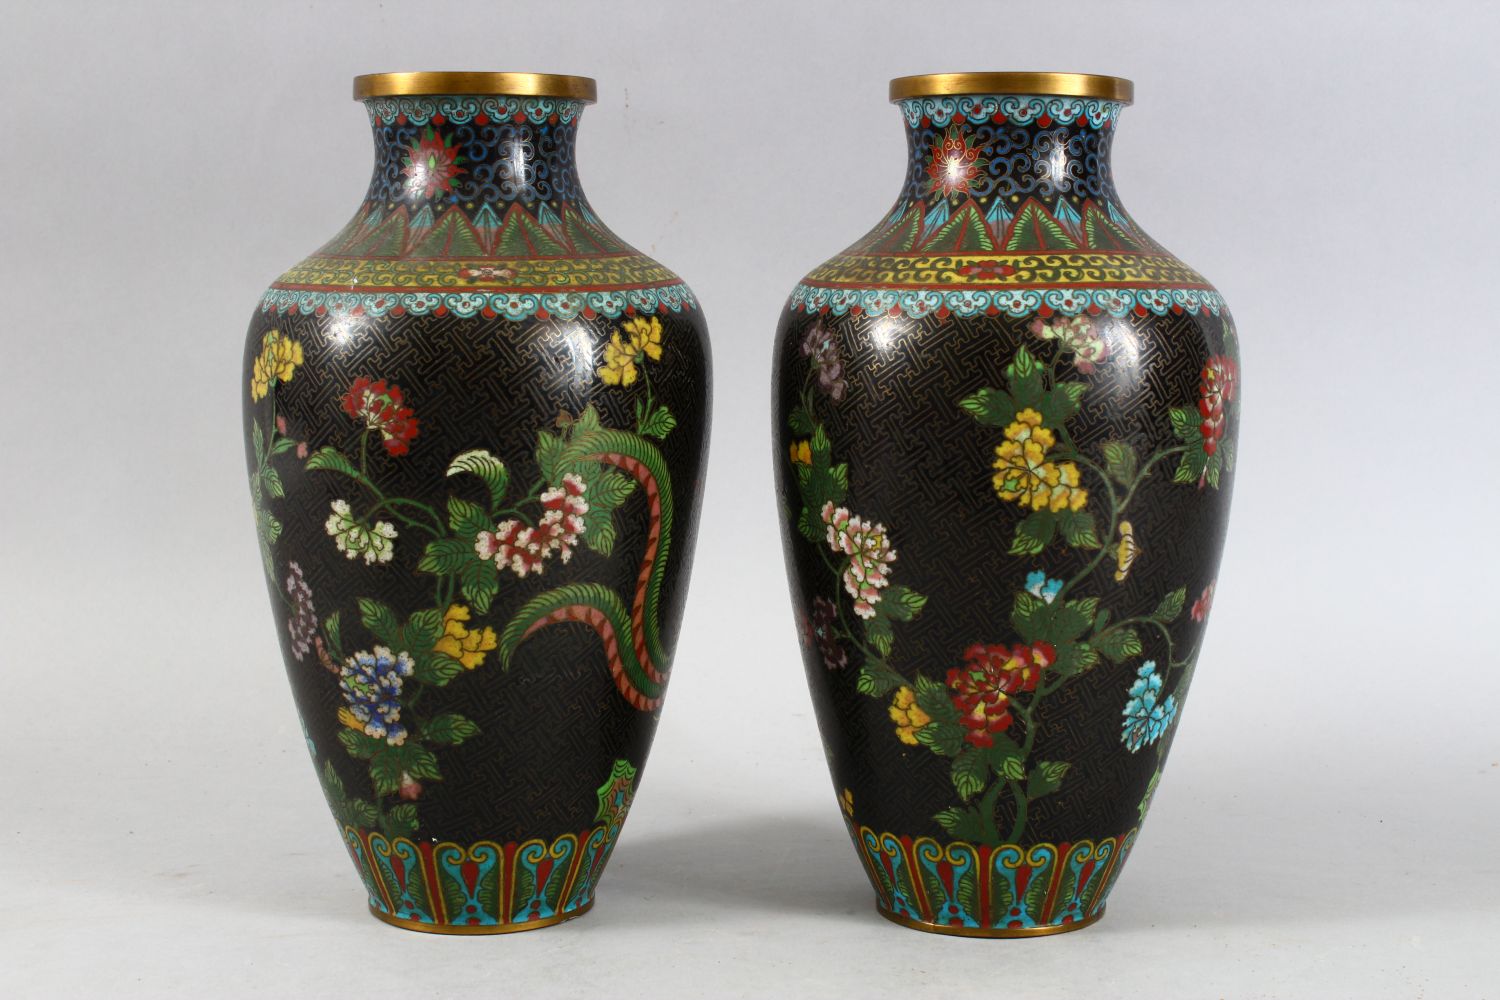 A PAIR OF 20TH CENTURY CHINESE CLOISONNE VASES, both decorated with scenes of phoenix birds - Image 7 of 14